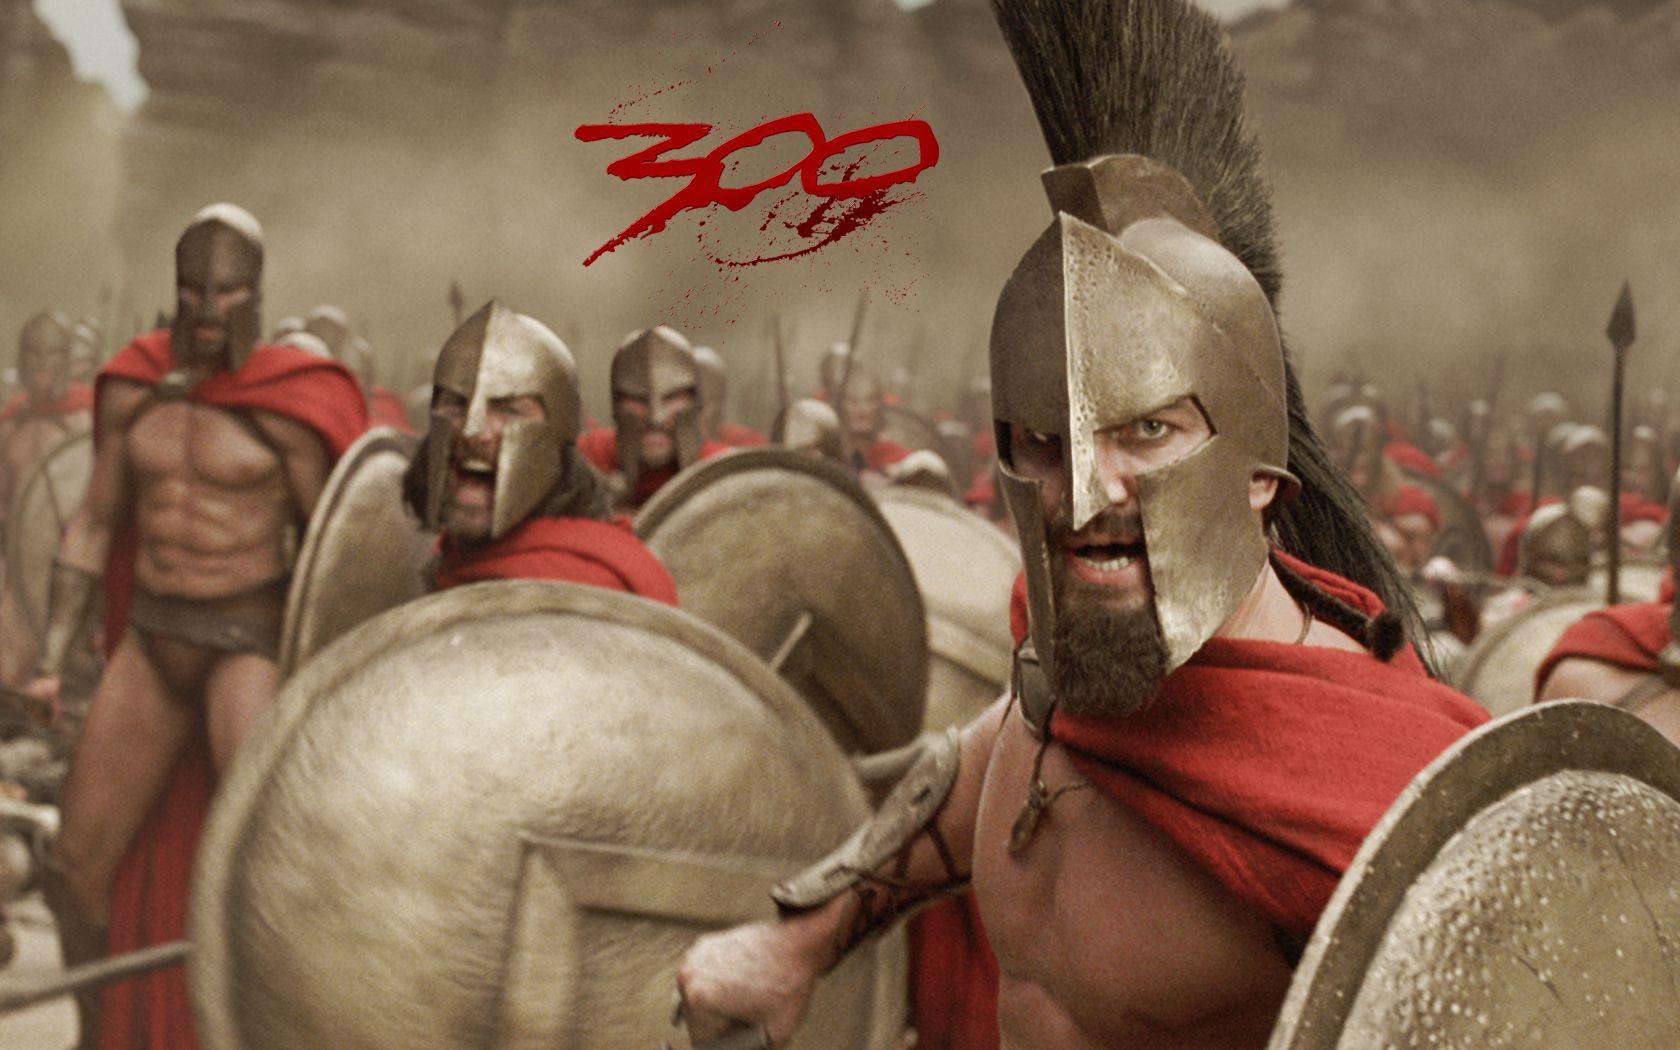 Awesome 300 Spartans Wall Paper Spartans Wallpaper